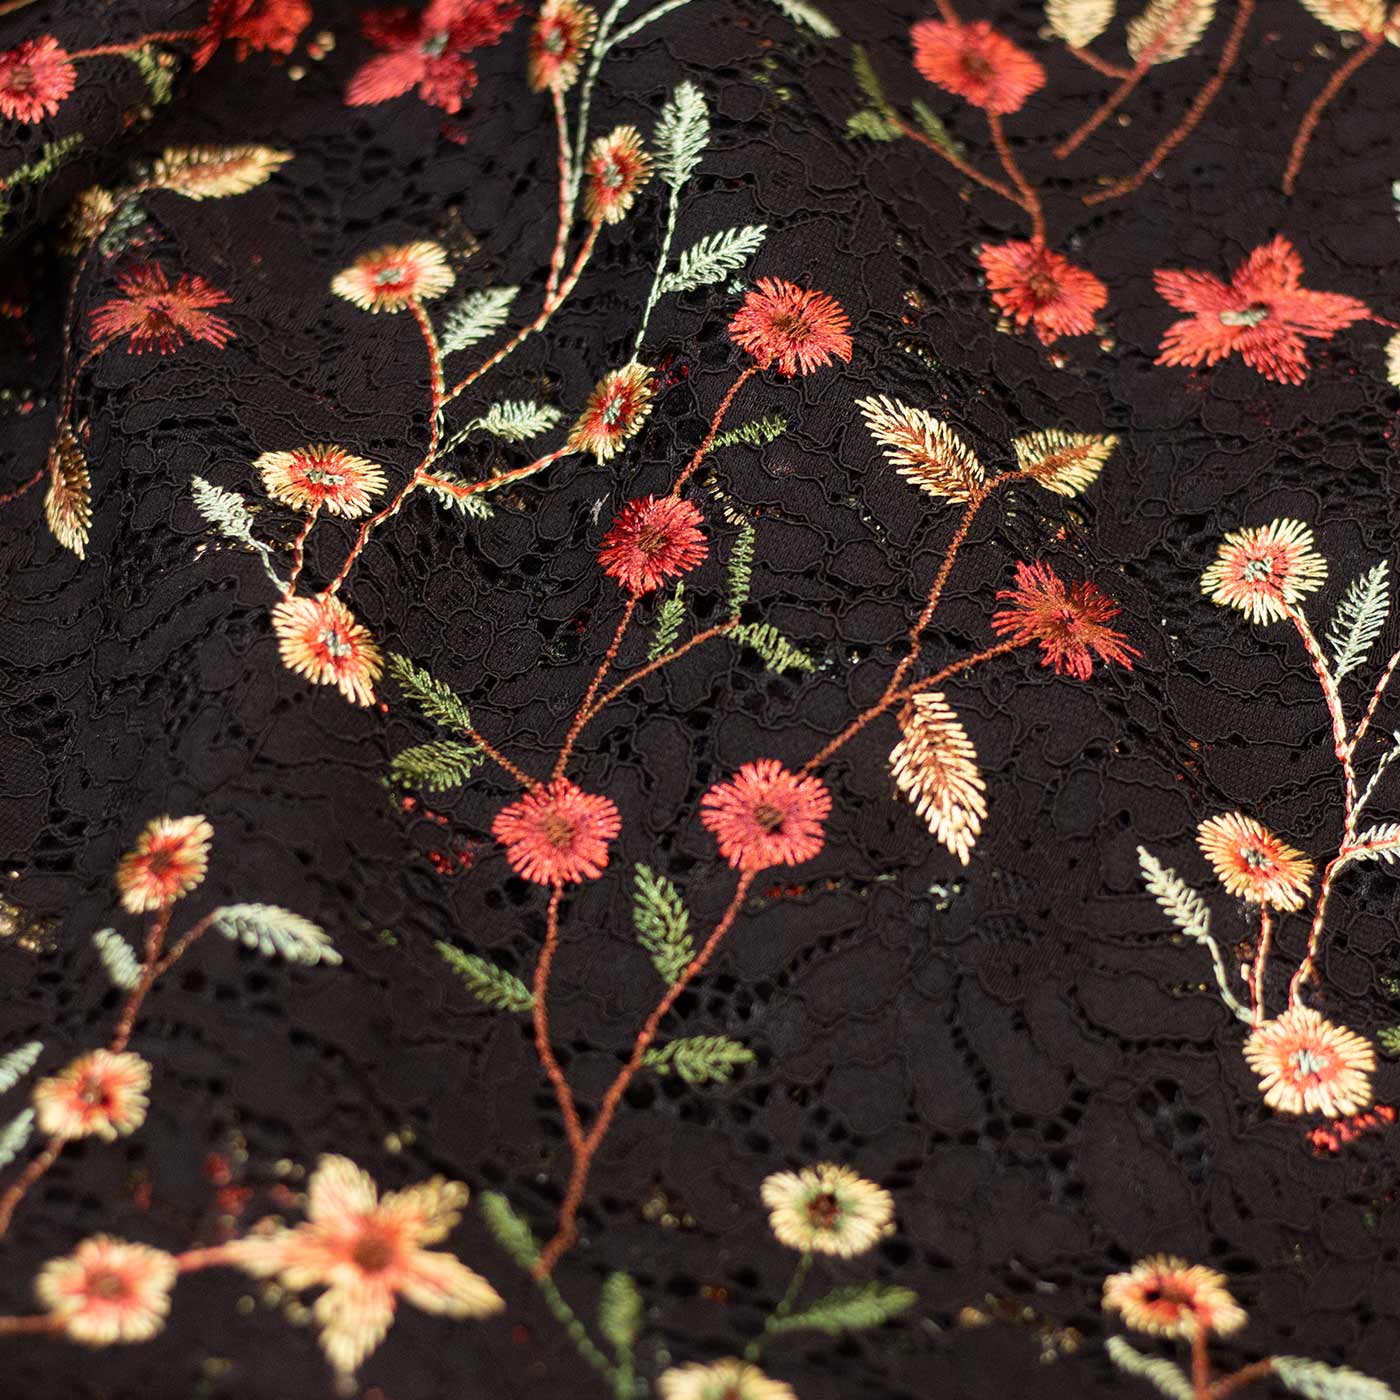 Multicolored Floral Embroidered Lace Fabric